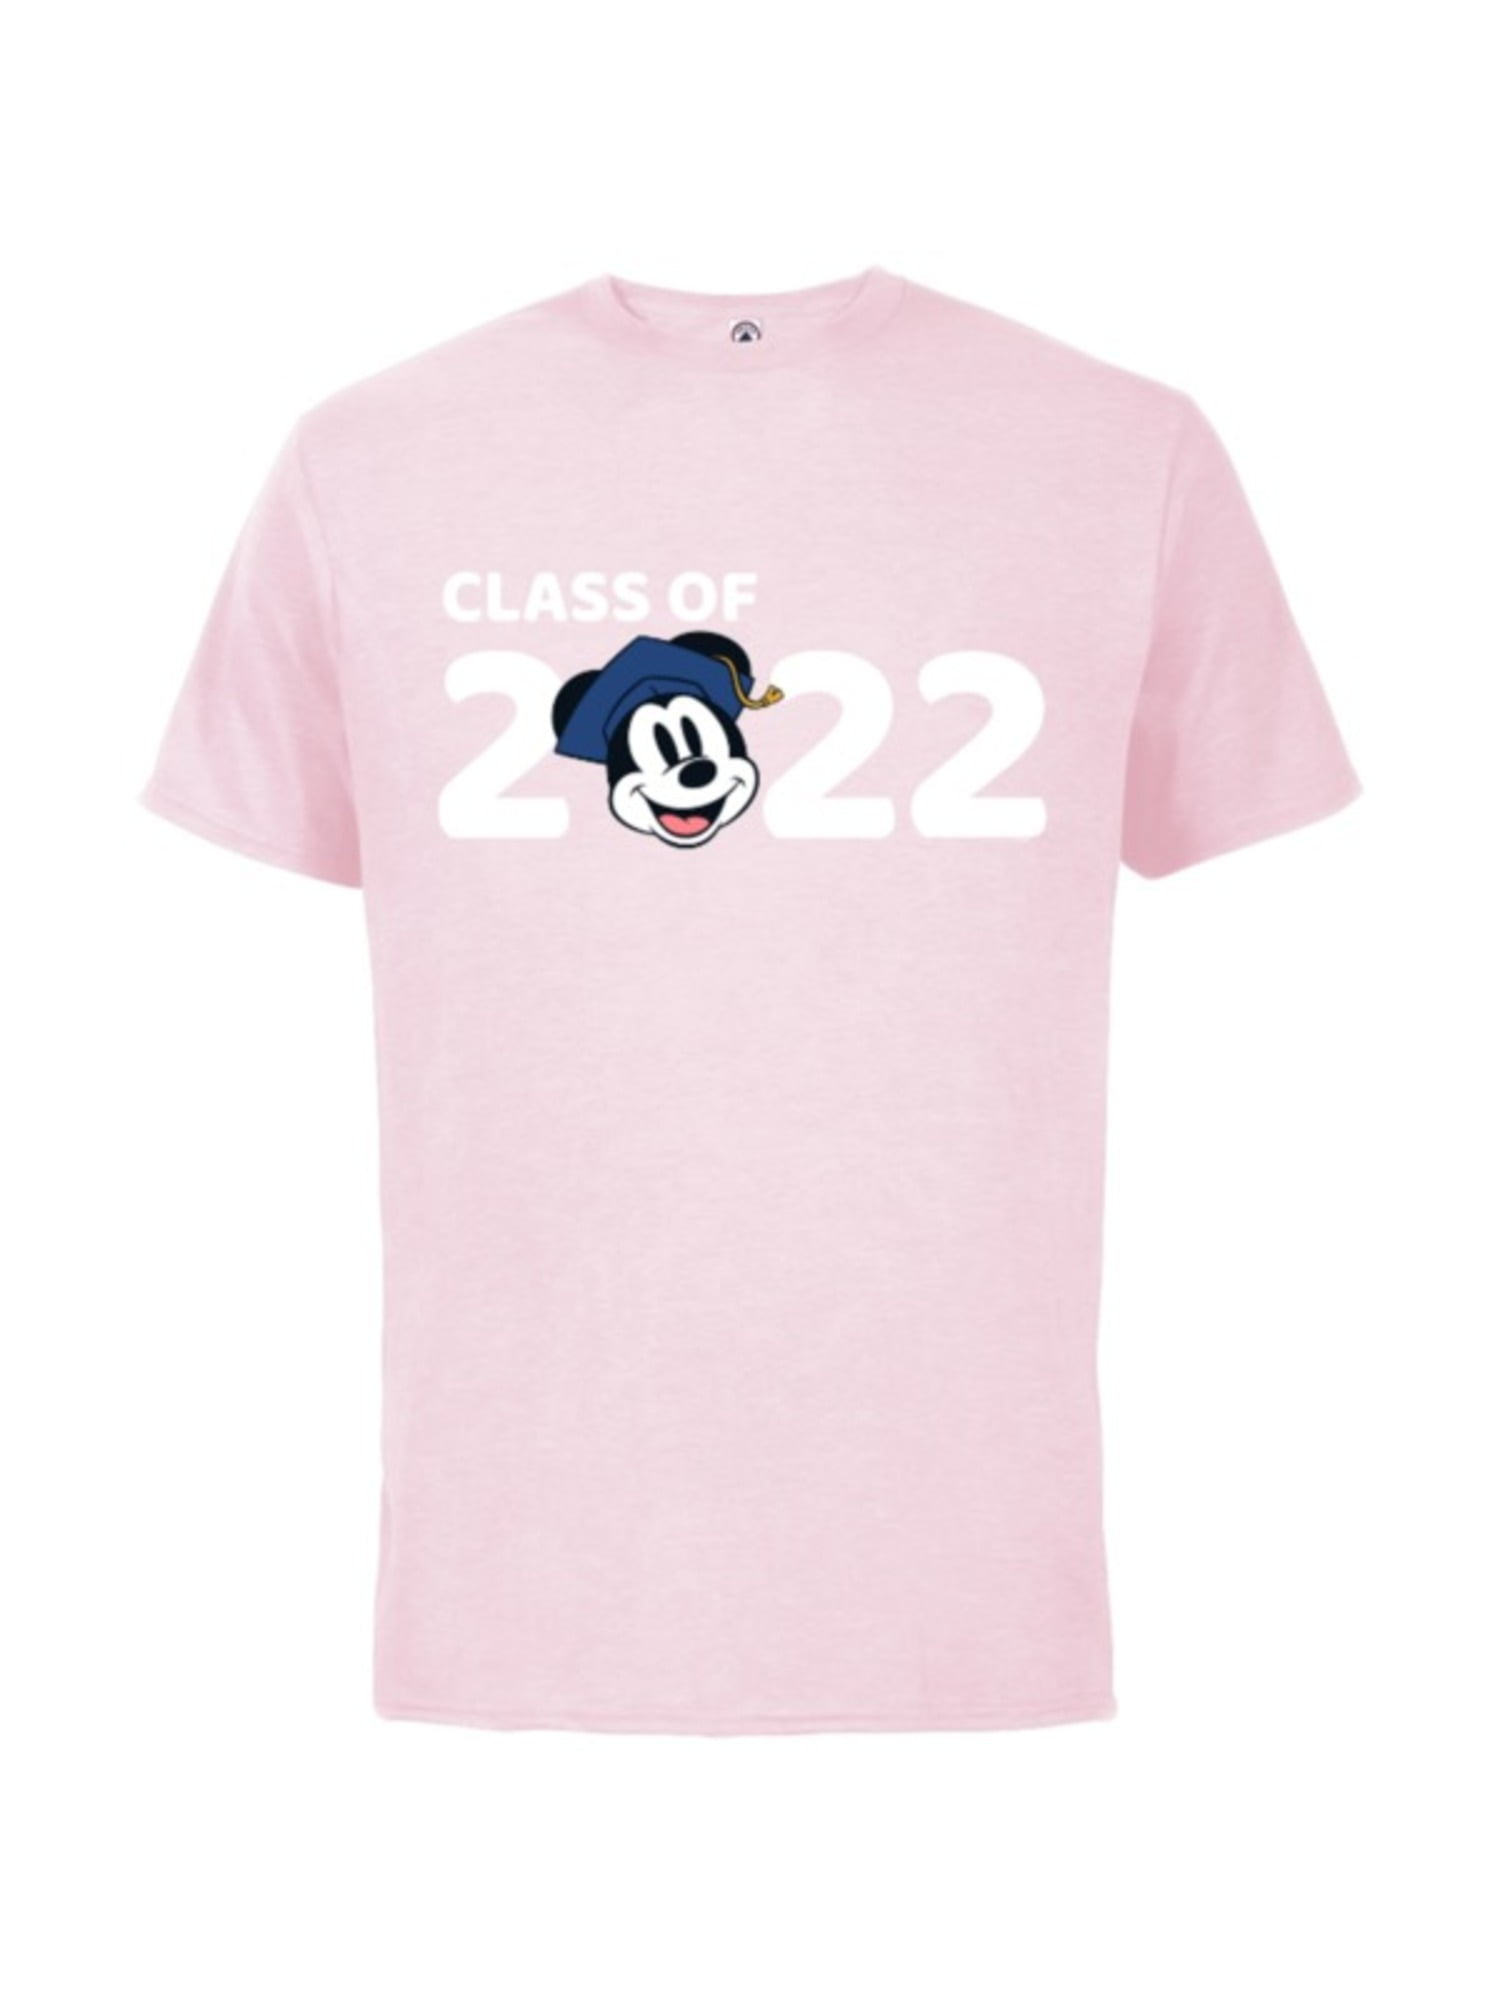 Disney Mickey Mouse Class Of 22 Short Sleeve Cotton T Shirt For Adults Customized Soft Pink Walmart Com